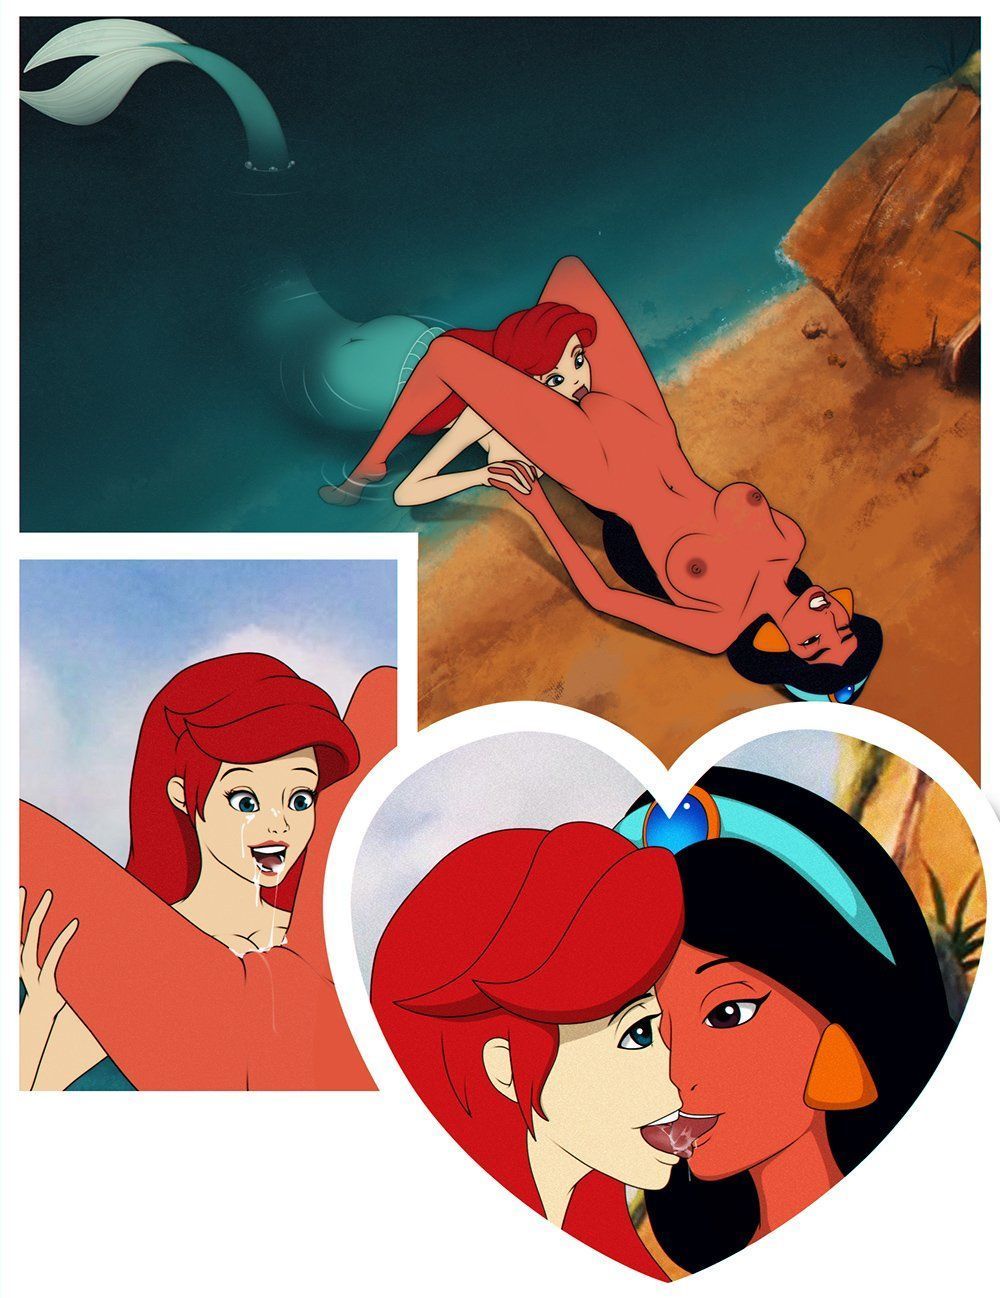 Honey reccomend Little mermaid licking pussy